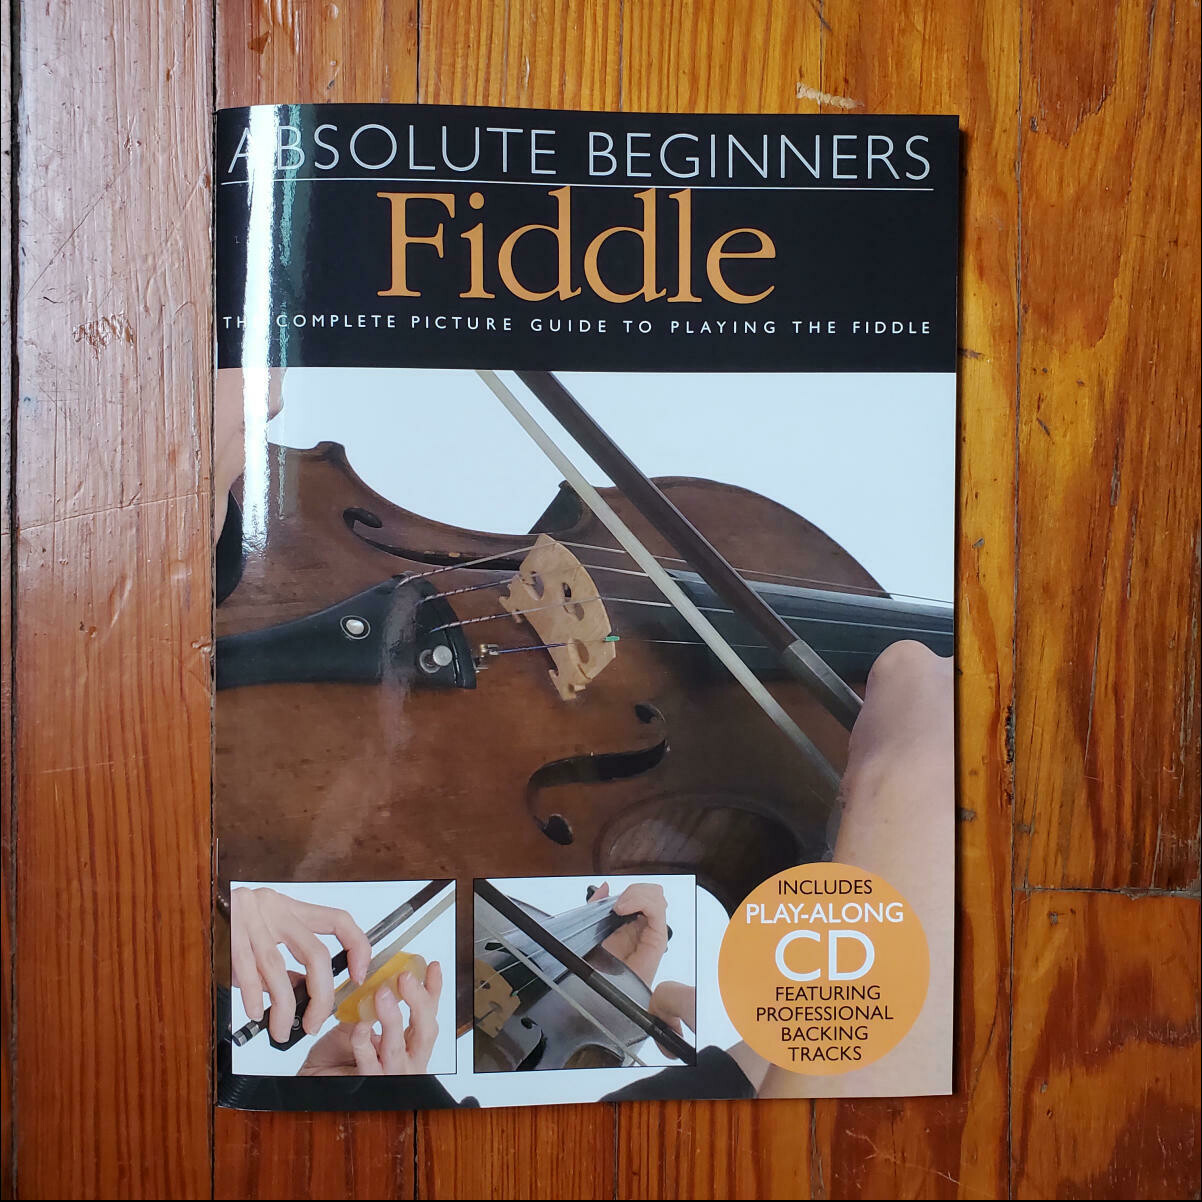 HL Absolute Beginners - Fiddle by: Various Authors